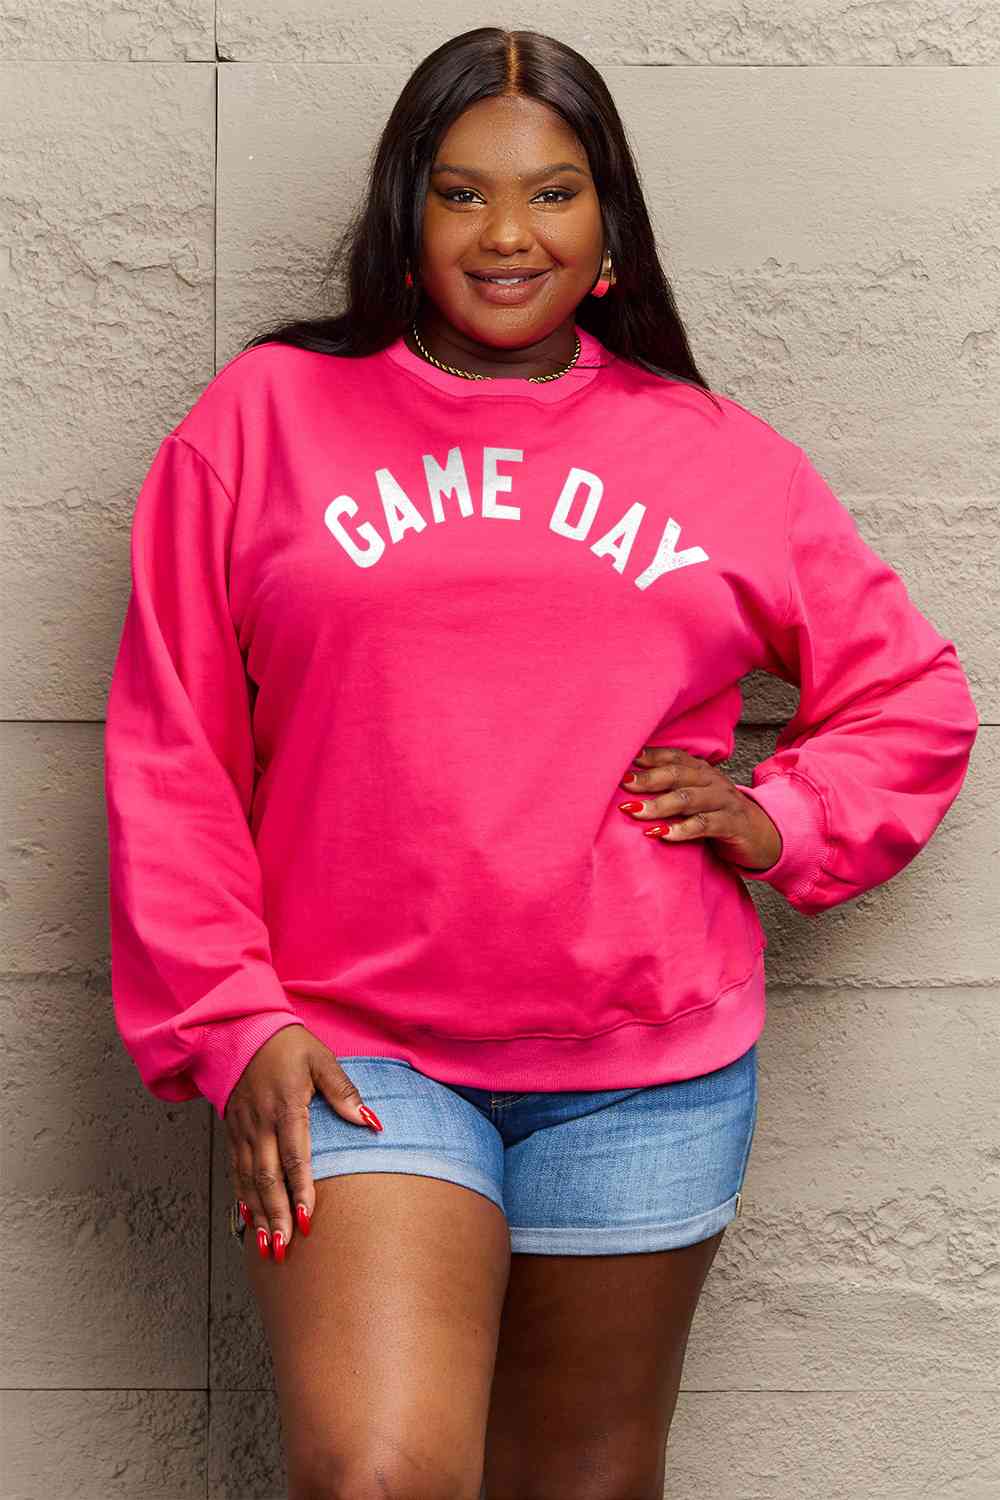 Simply Love Full Size GAME DAY Graphic Sweatshirt BLUE ZONE PLANET